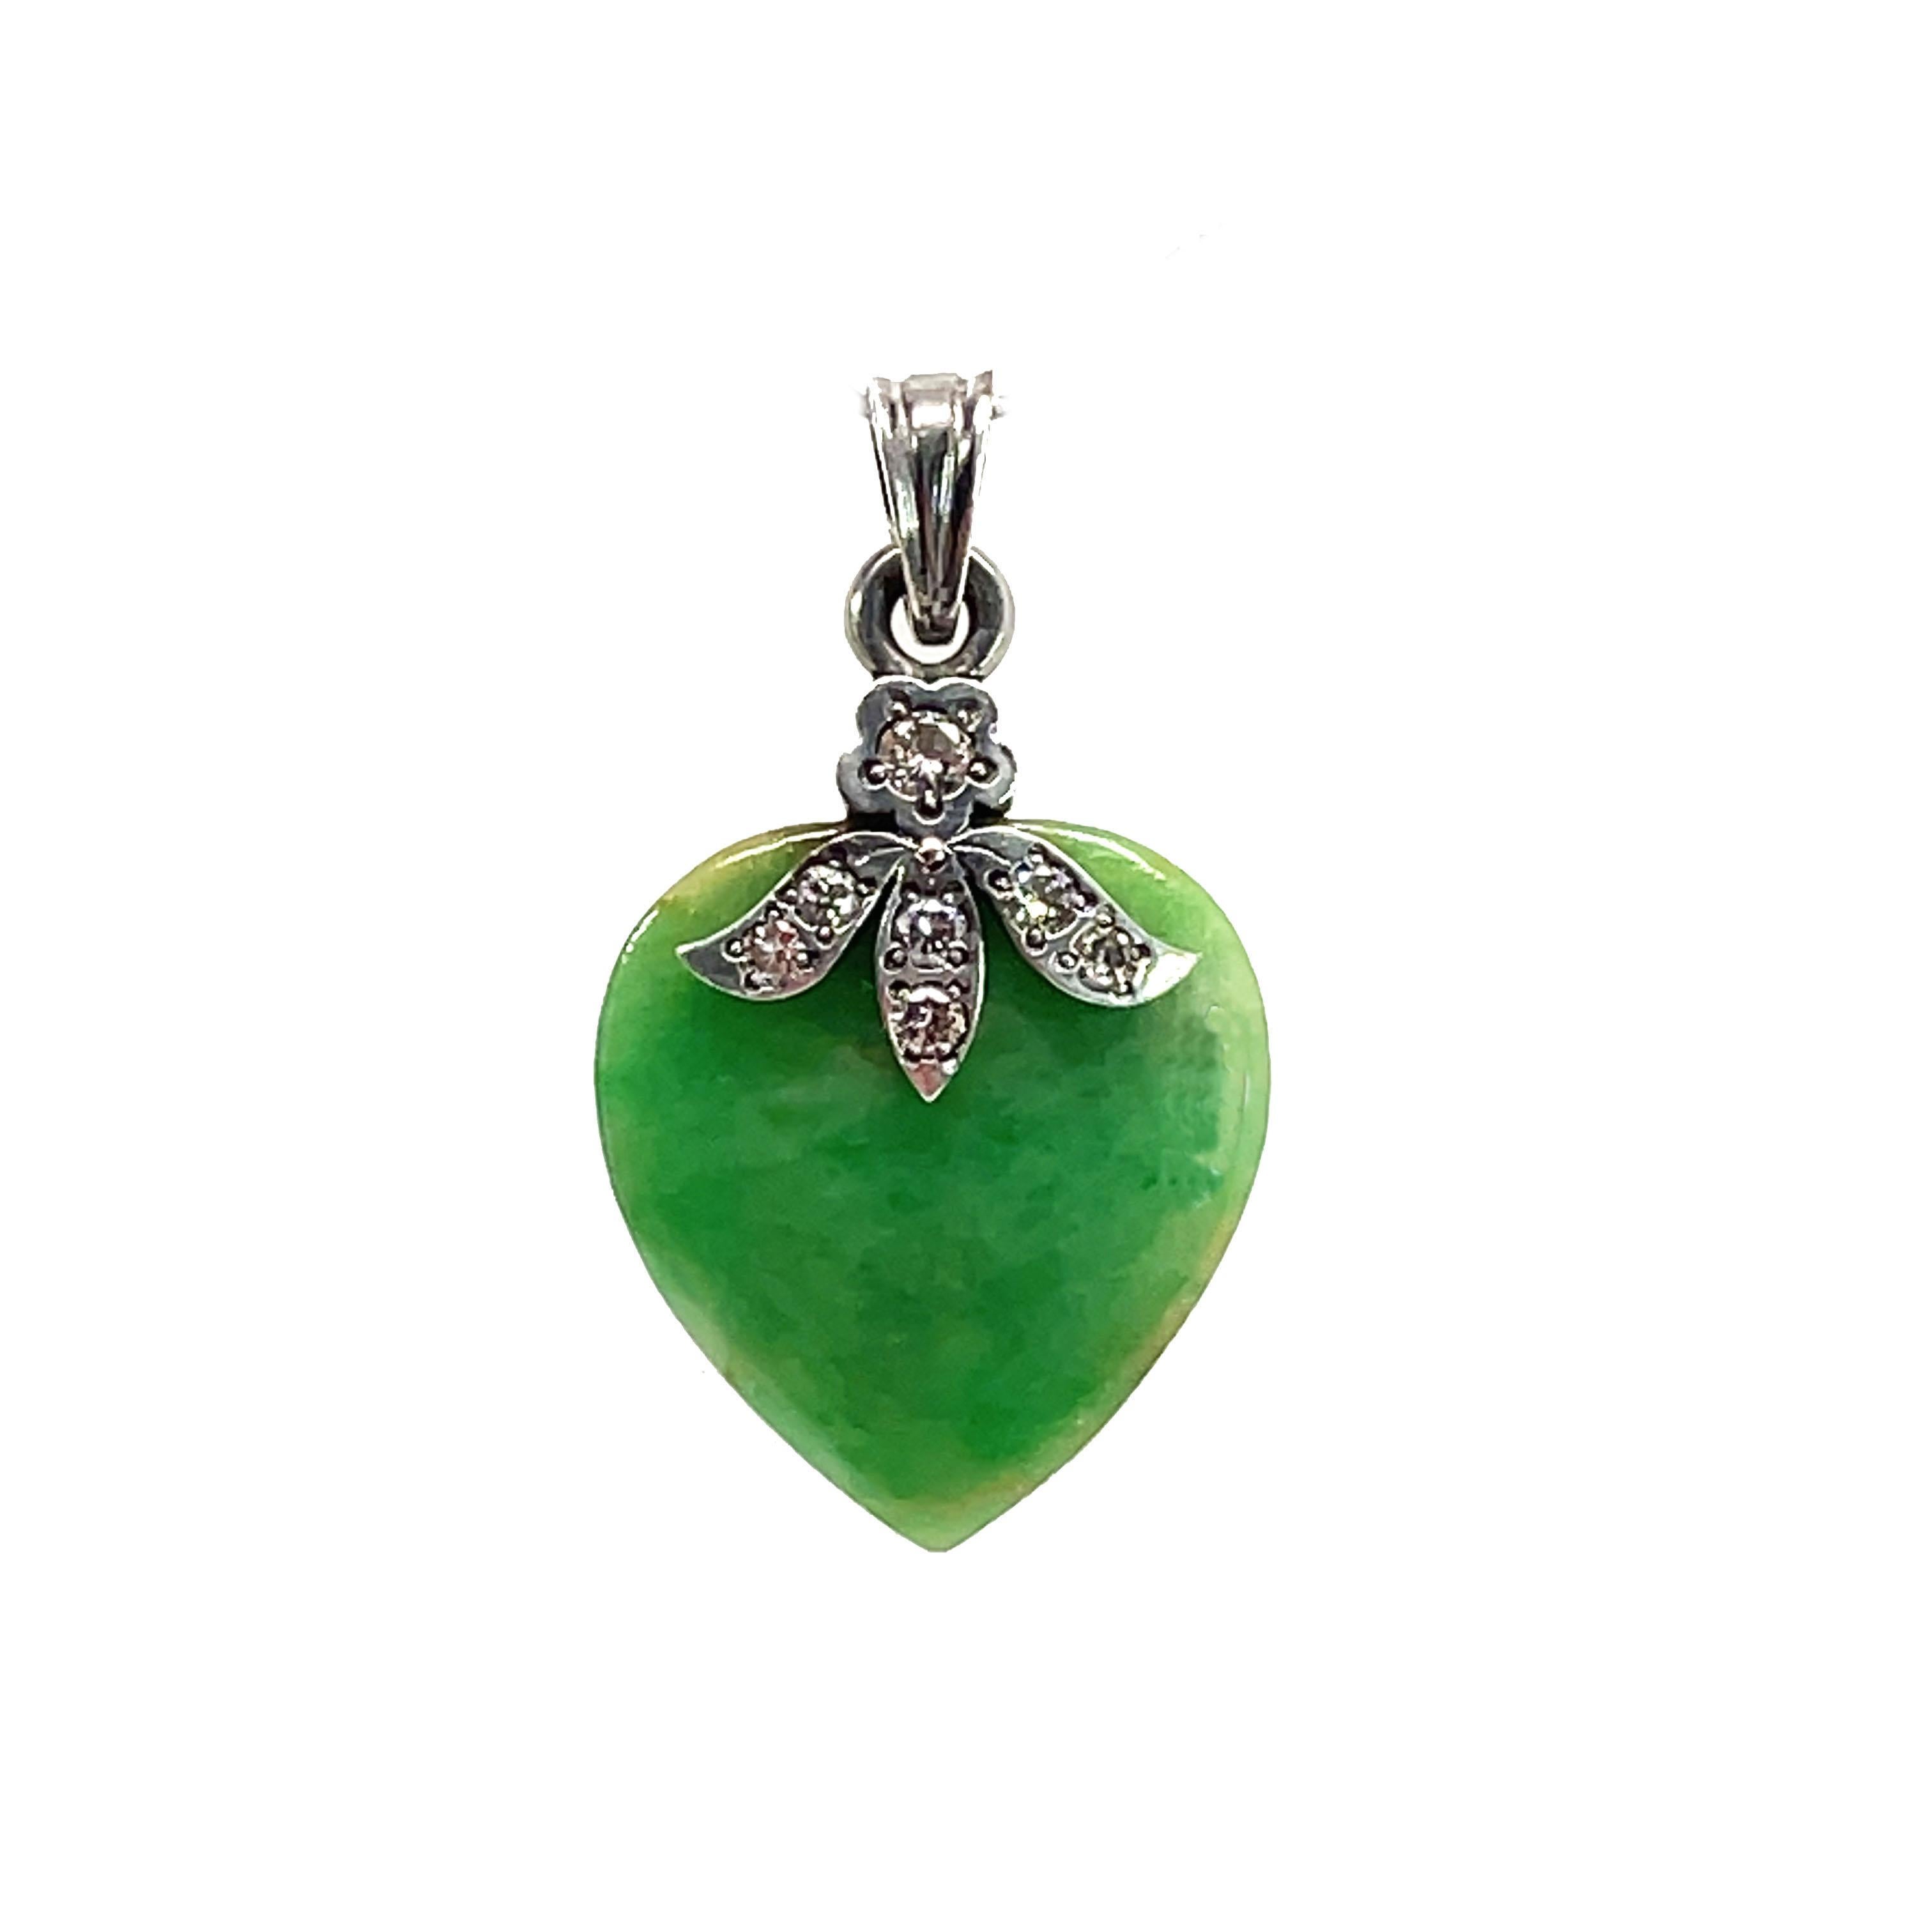 This is a beautiful sterling silver pendant from the 1960s with beautiful white diamonds and a heart-shaped jade!  This sweet pendant would make the perfect gift to someone you love! The Chinese associate jade with clarity of mind and purity of